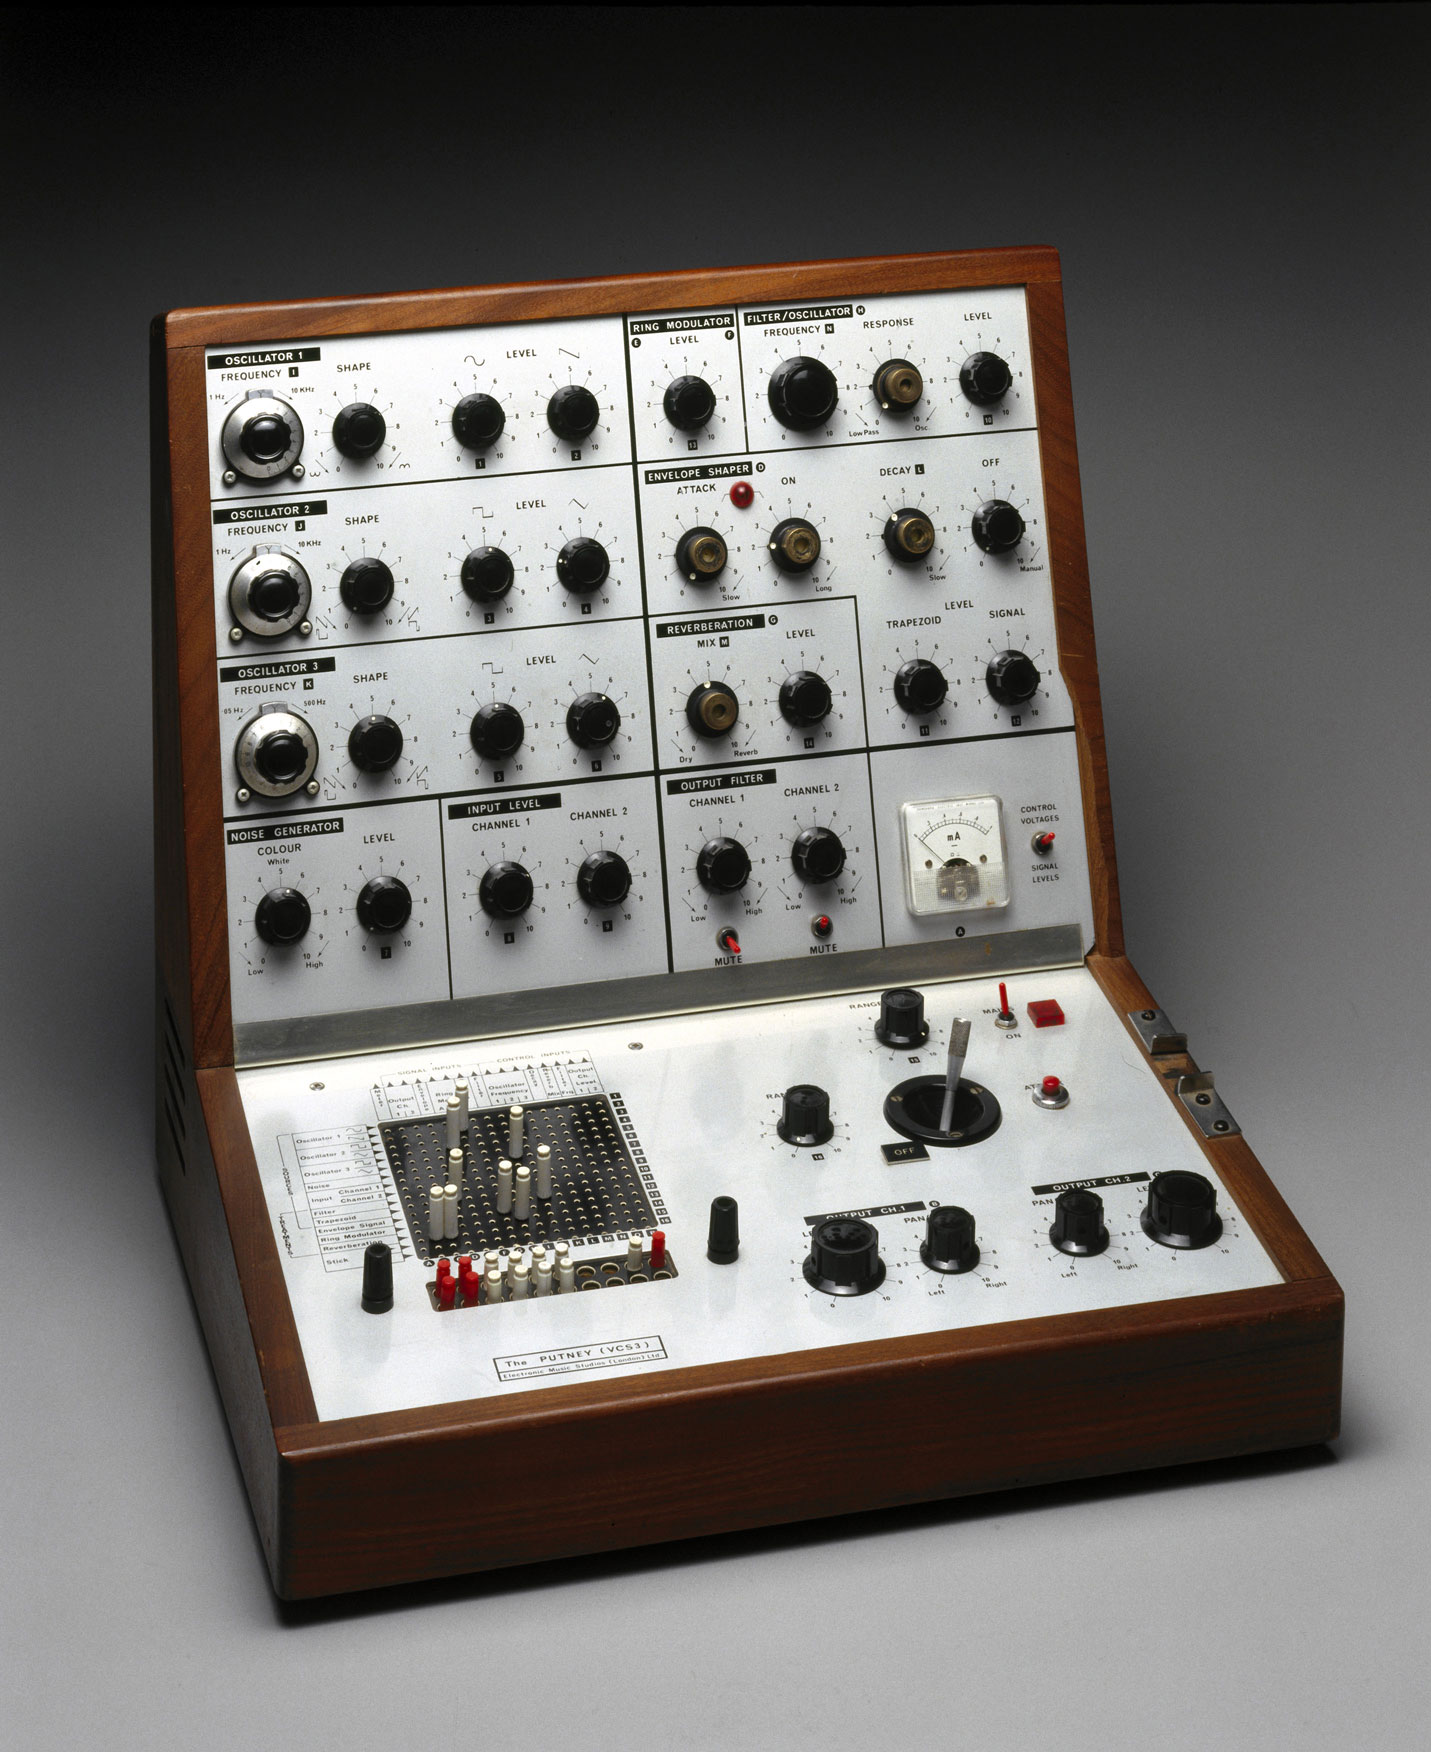 VCS3 synthesiser by EMS